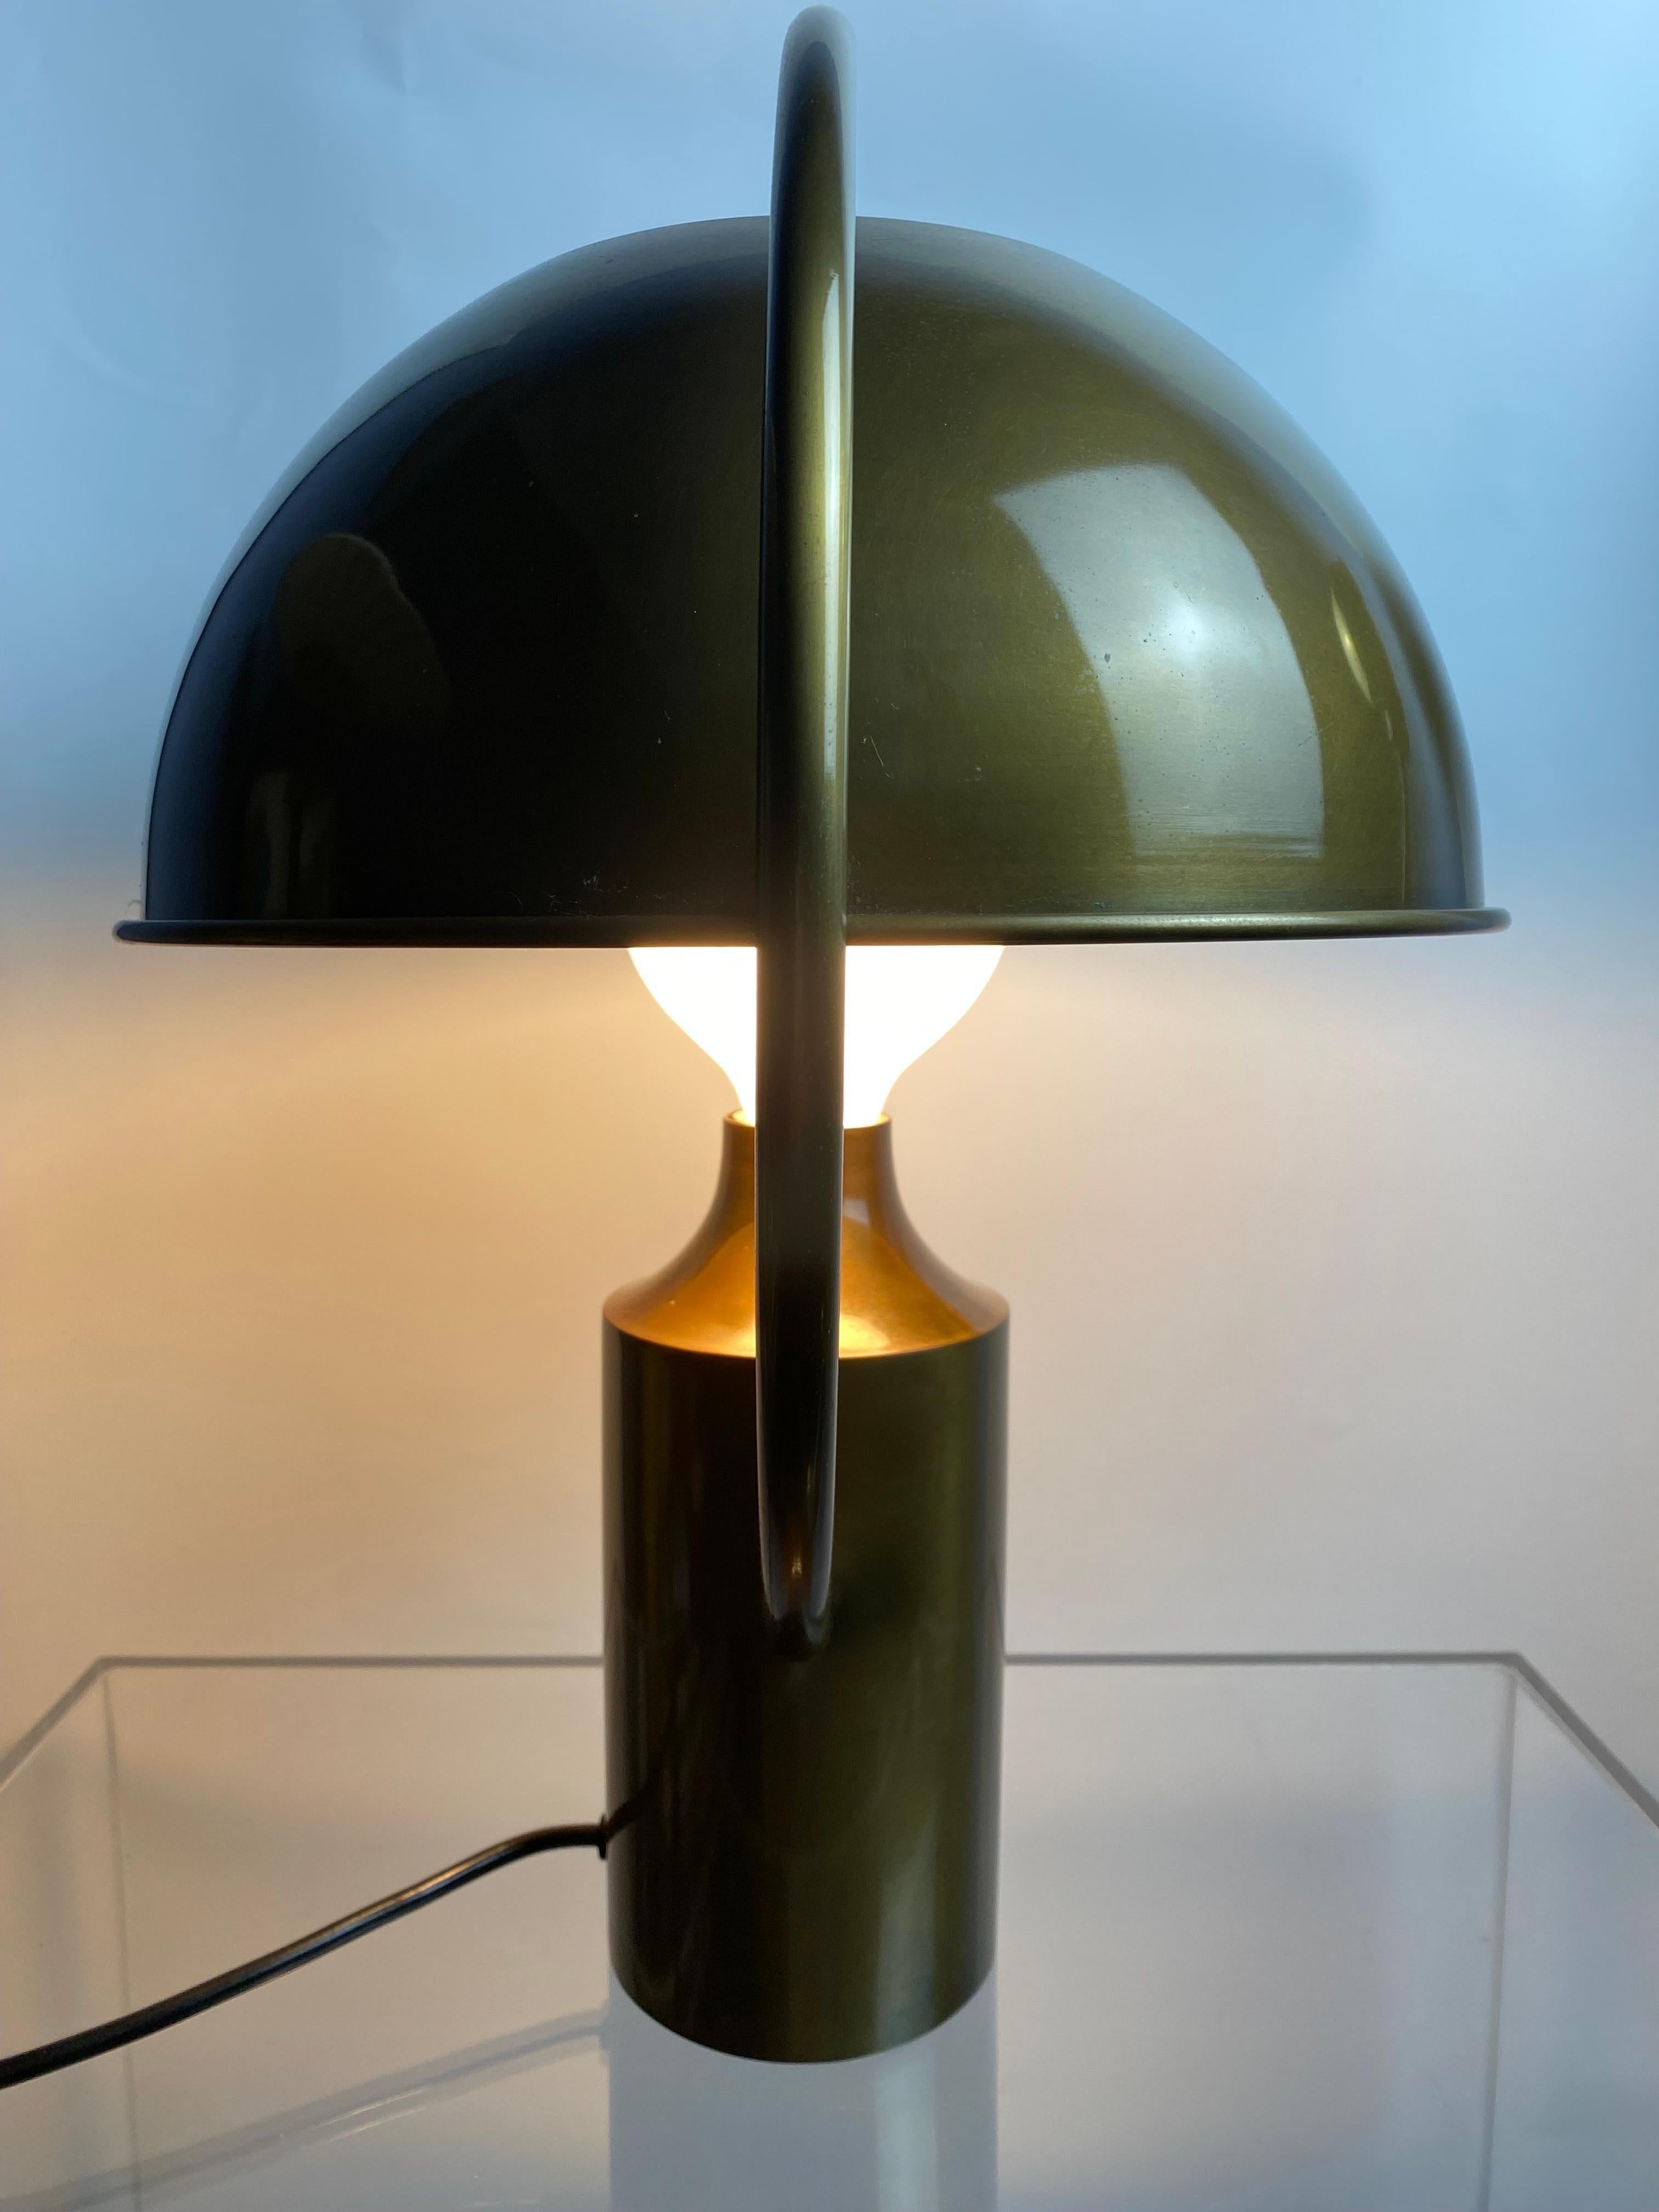 Rare German Midcentury Table Lamp in Solid Brass by Günter&Florian Schulz 1970s For Sale 2